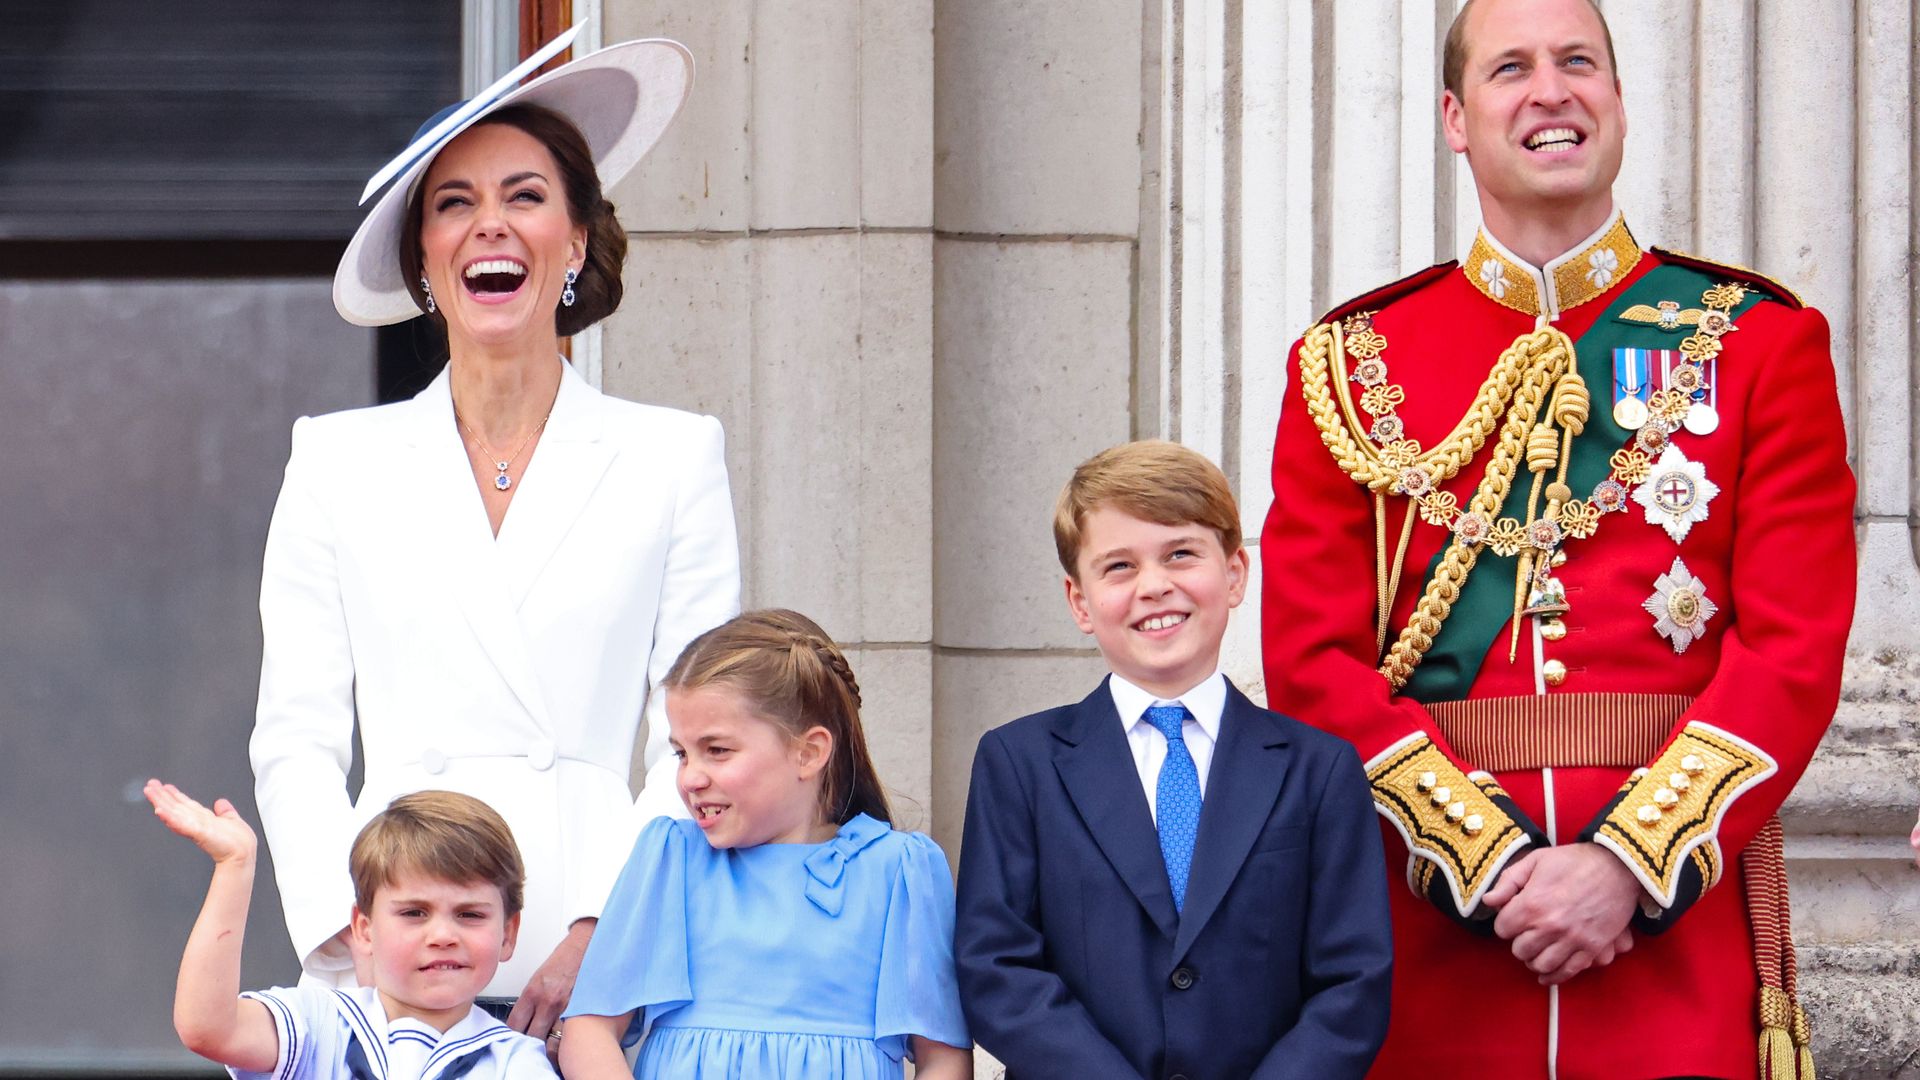 The Prince and Princess of Wales, Prince George, Princess Charlotte and Prince Louis watch the RAF flypast on the balcony of Buckingham Palace during the Trooping the Colour parade on June 02, 2022 in London, England.